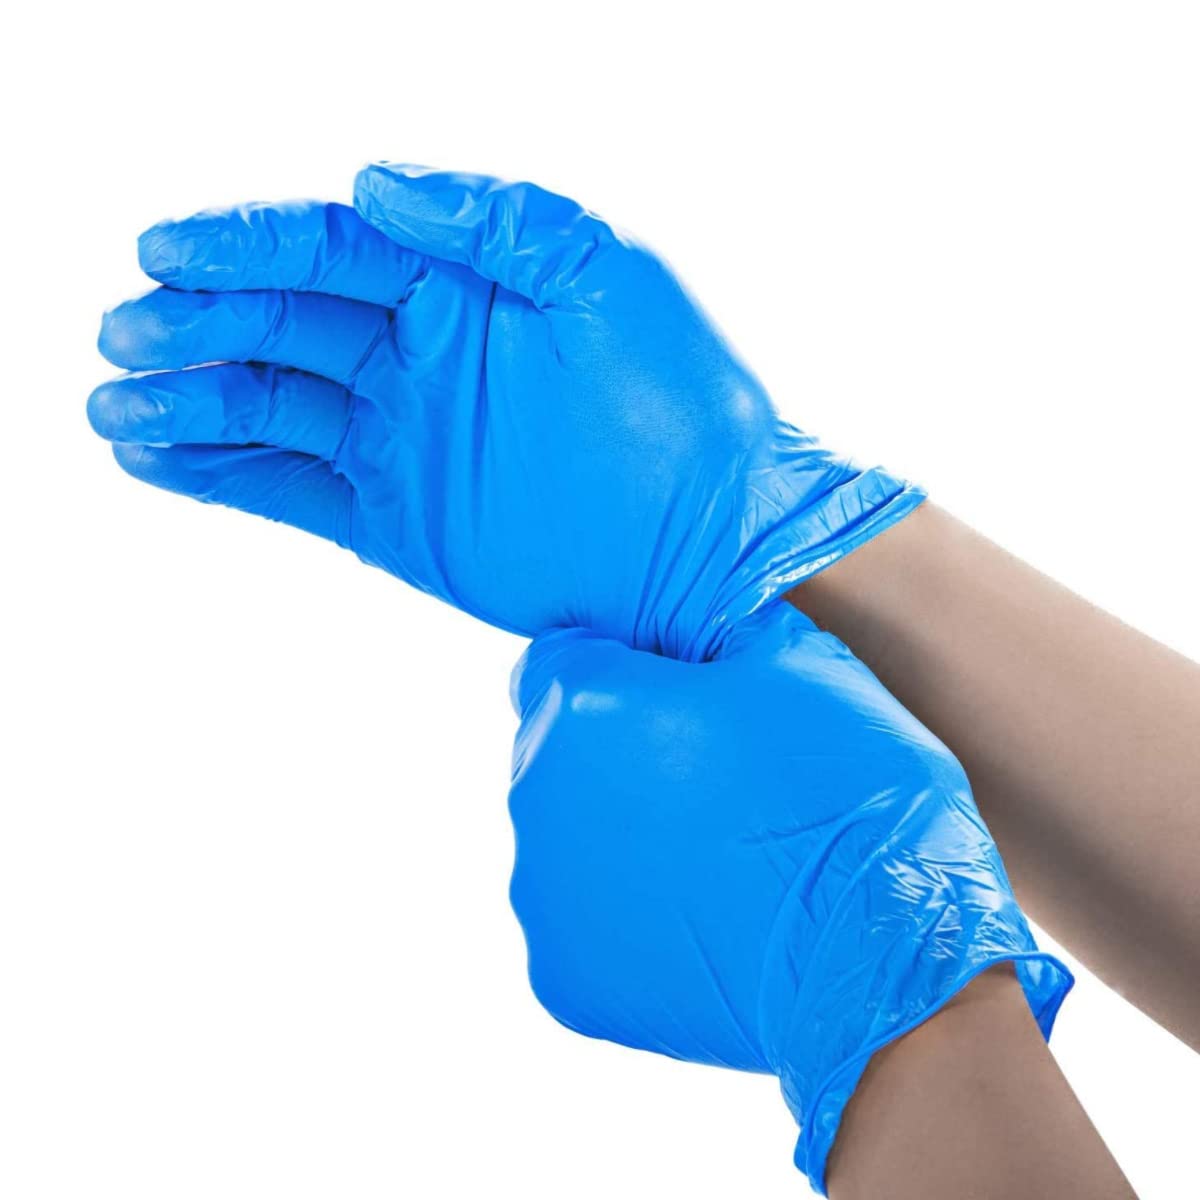 Jointown Basic Medical Synmax Vinyl Exam Gloves - Latex-Free & Powder-Free - Large, BMPF-3003 Blue Box of 100